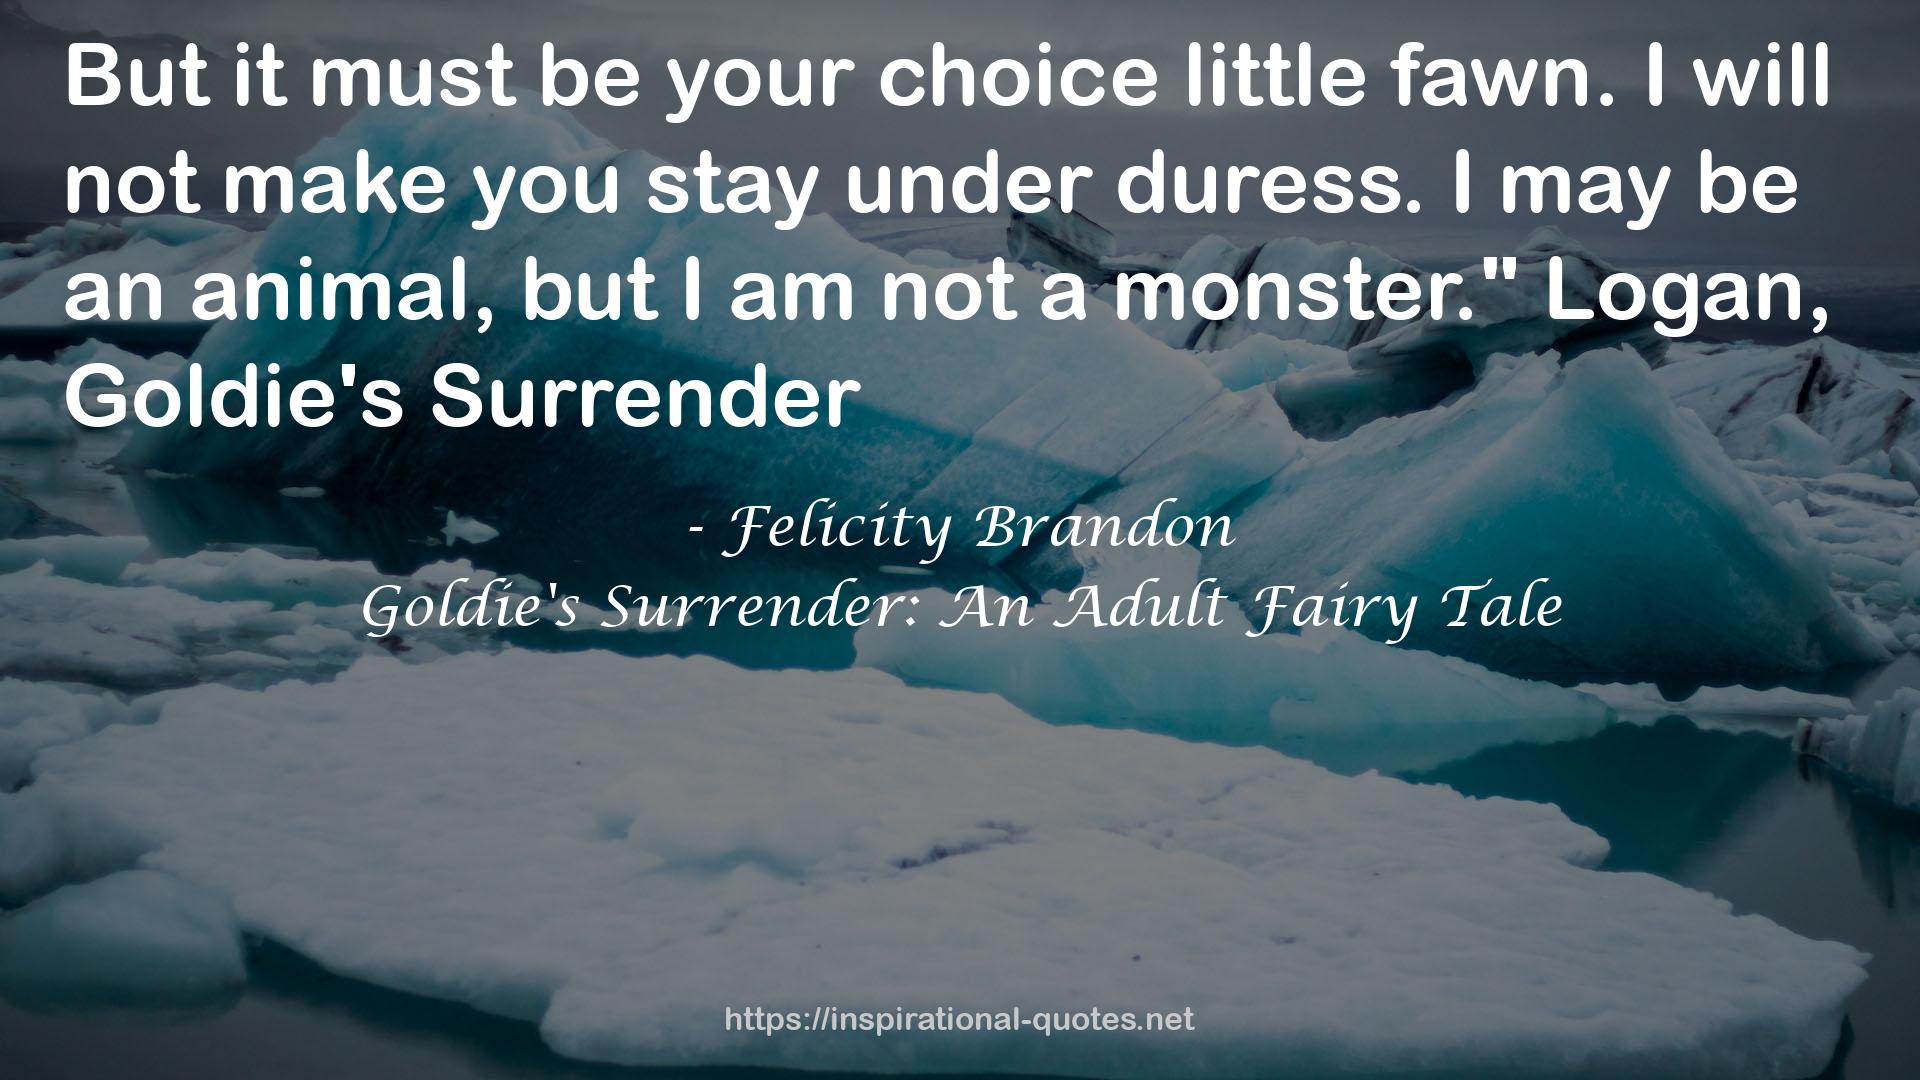 Goldie's Surrender: An Adult Fairy Tale QUOTES